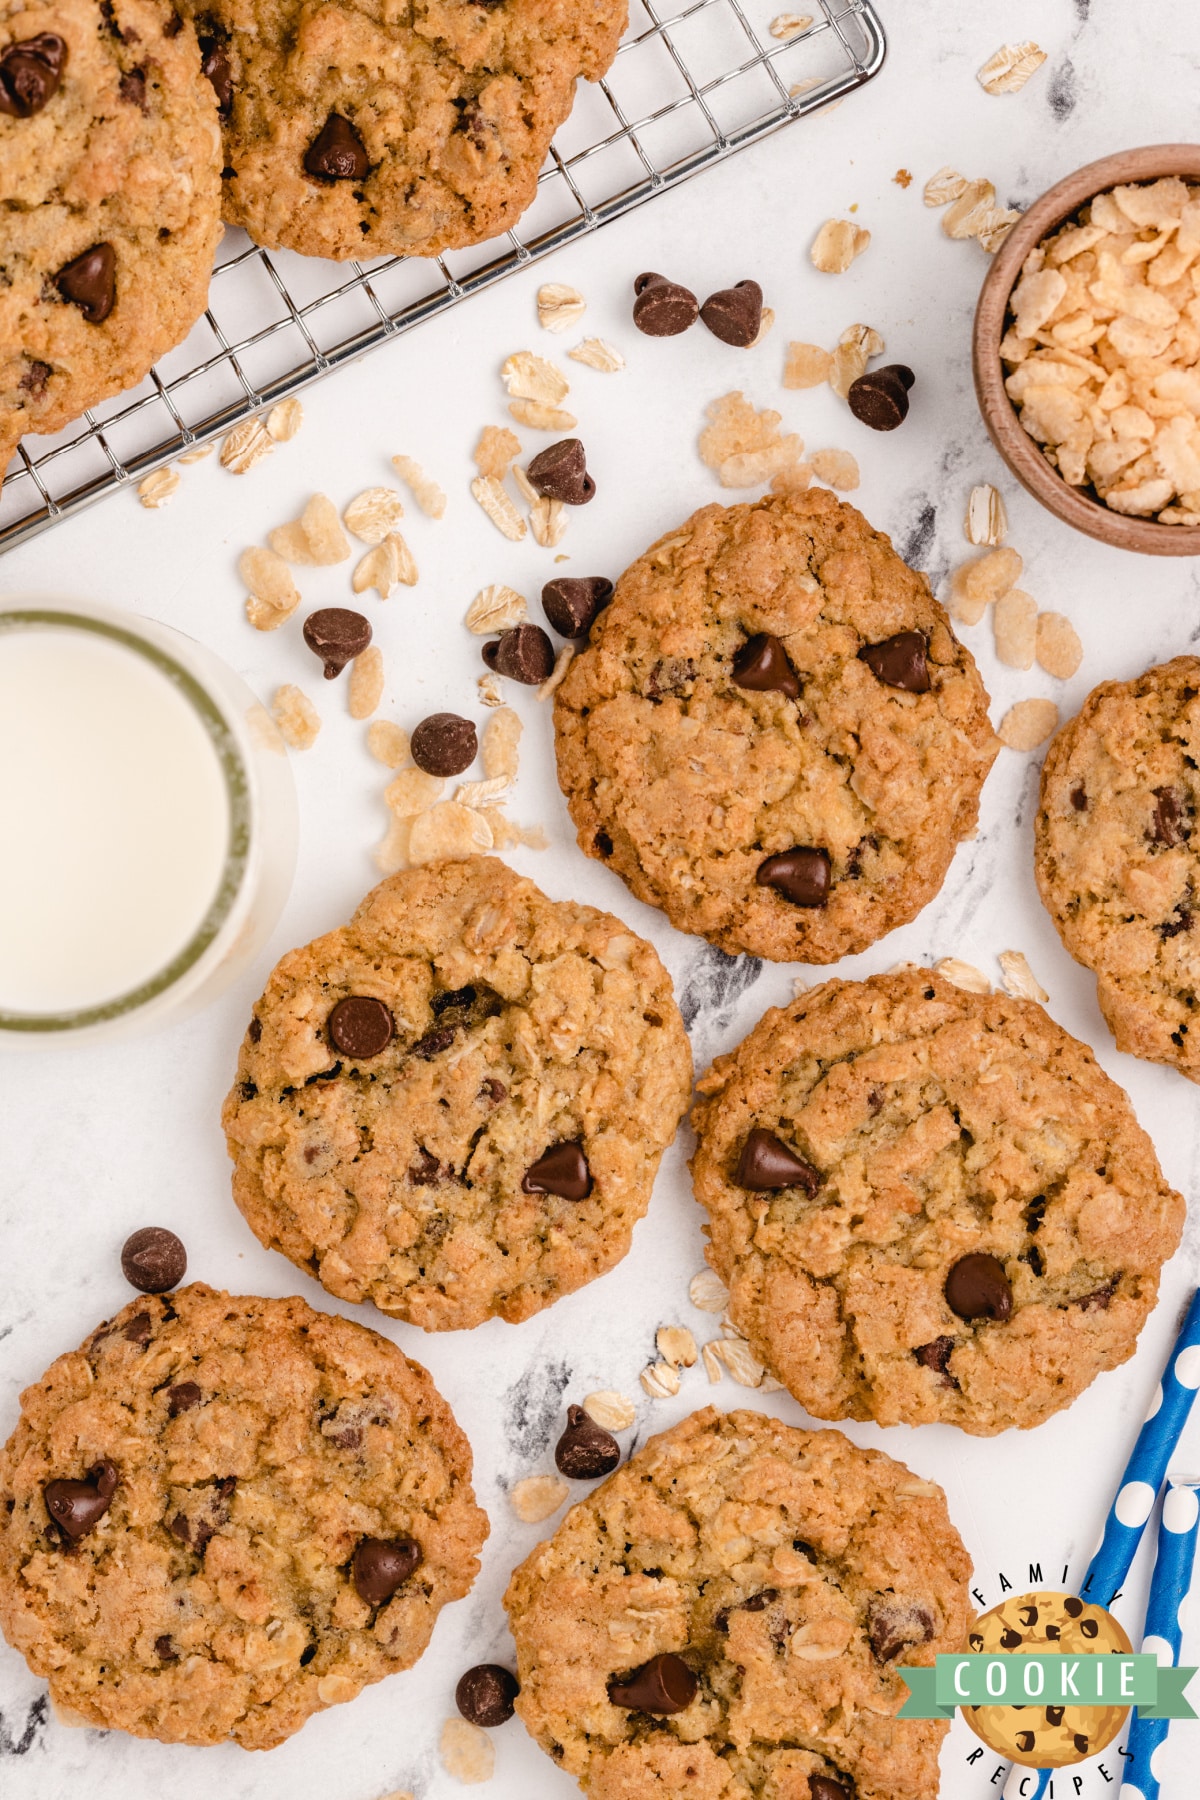 Cookies with oats, crispy rice cereal and chocolate chips